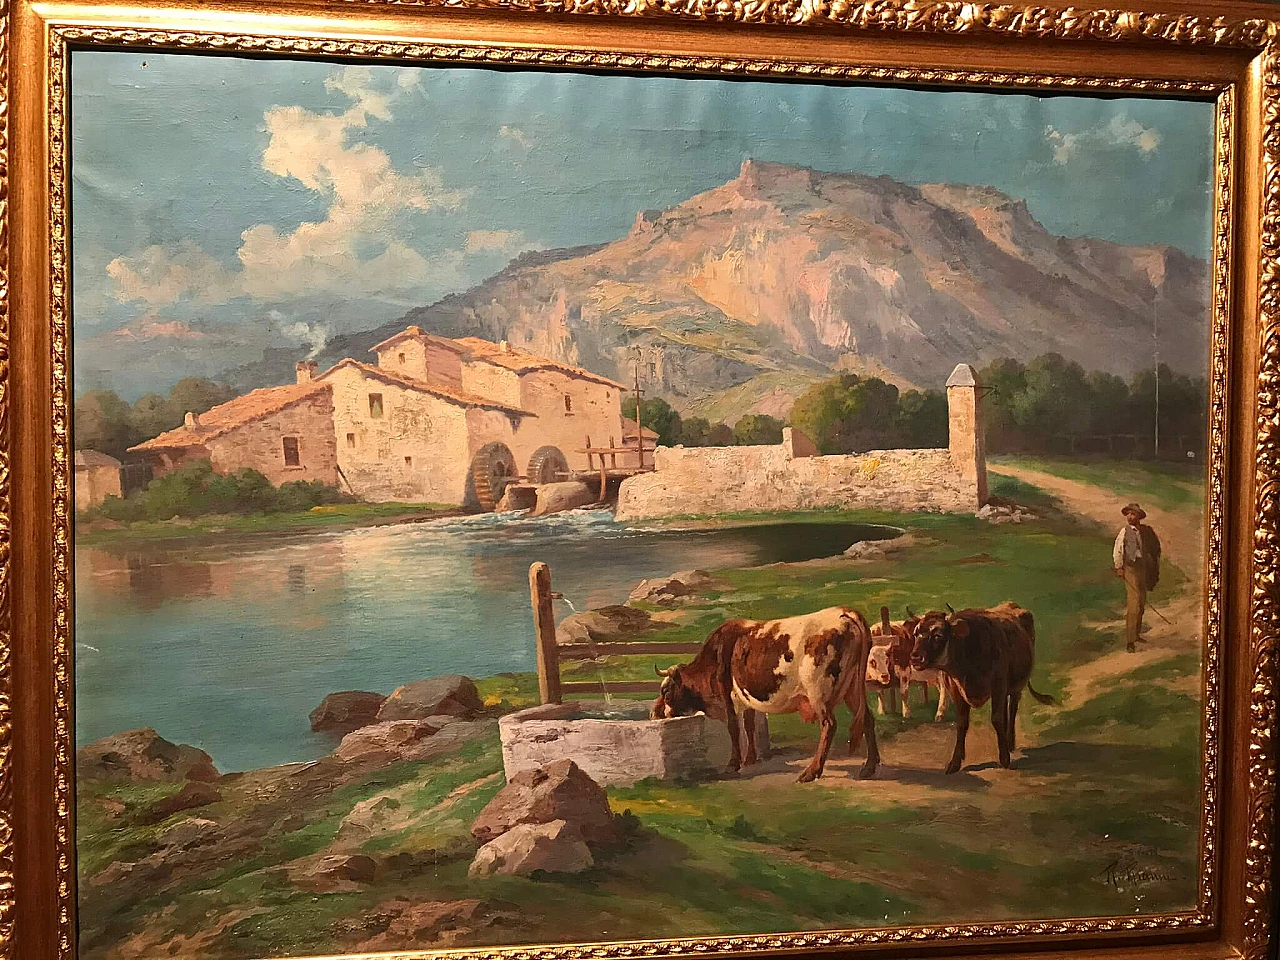 Neapolitan school painting oil on canvas signed R. Rianni, 19th century 1175877